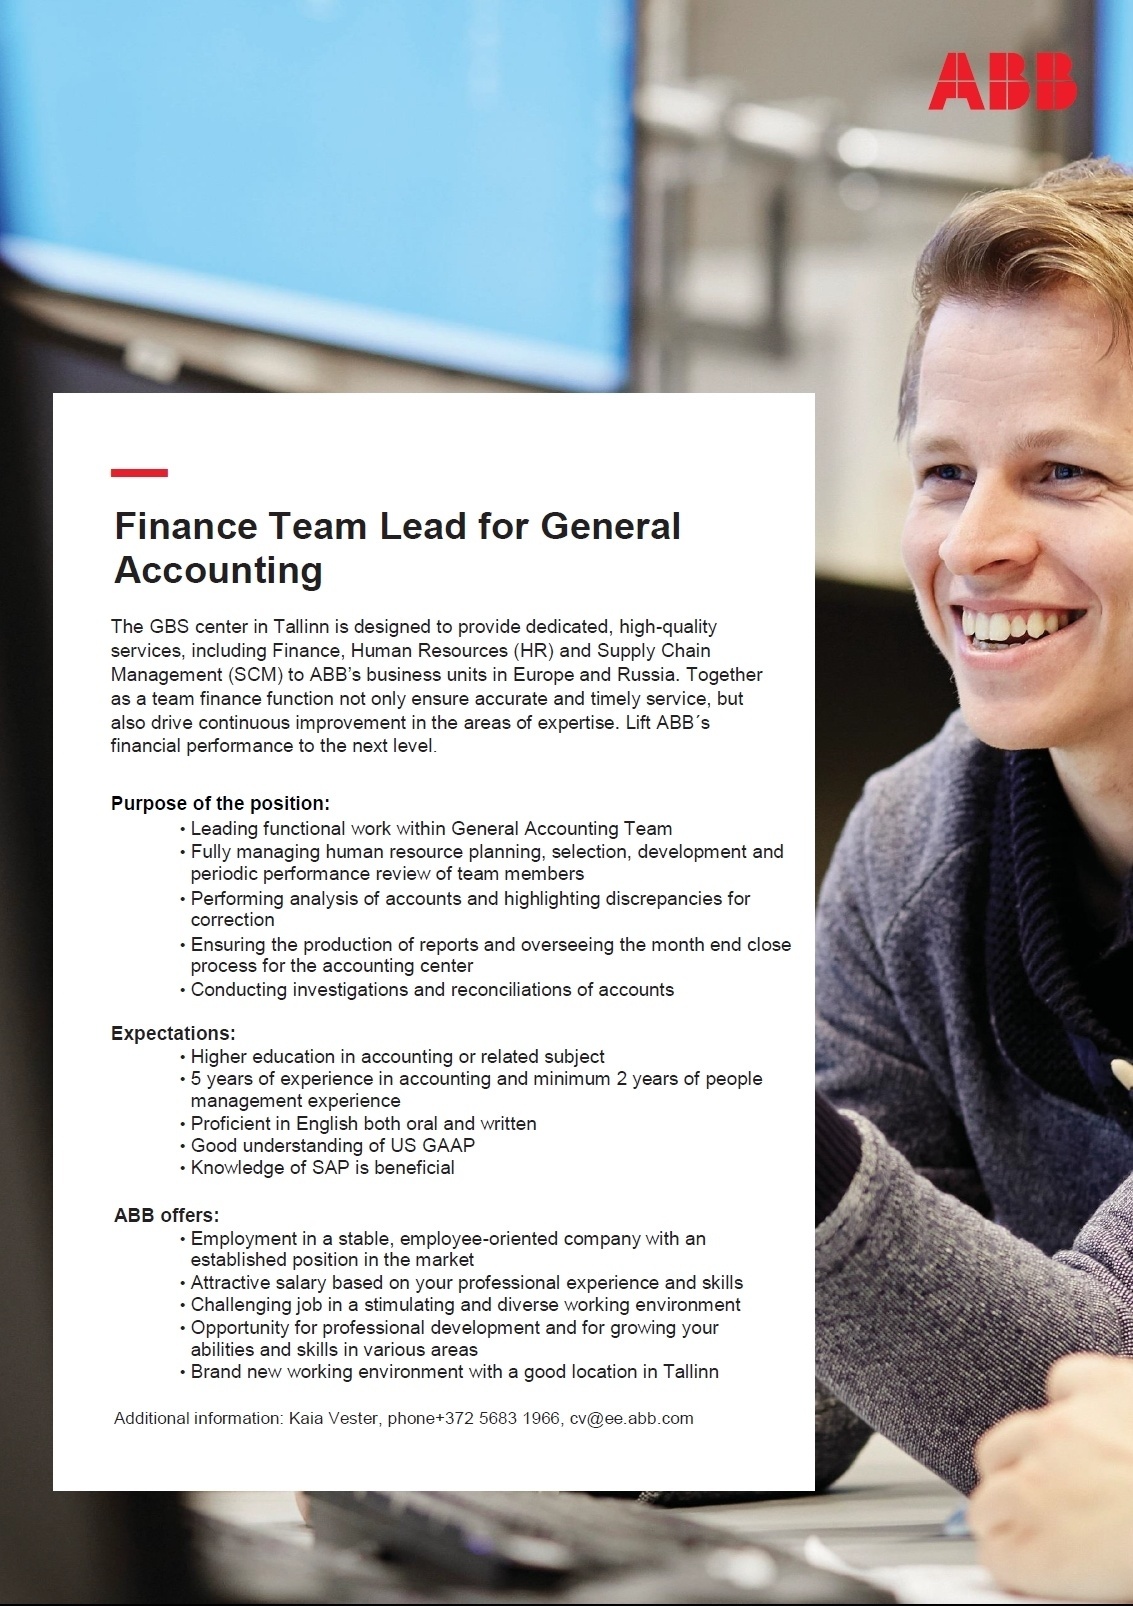 ABB AS Finance Team Lead for General Accounting